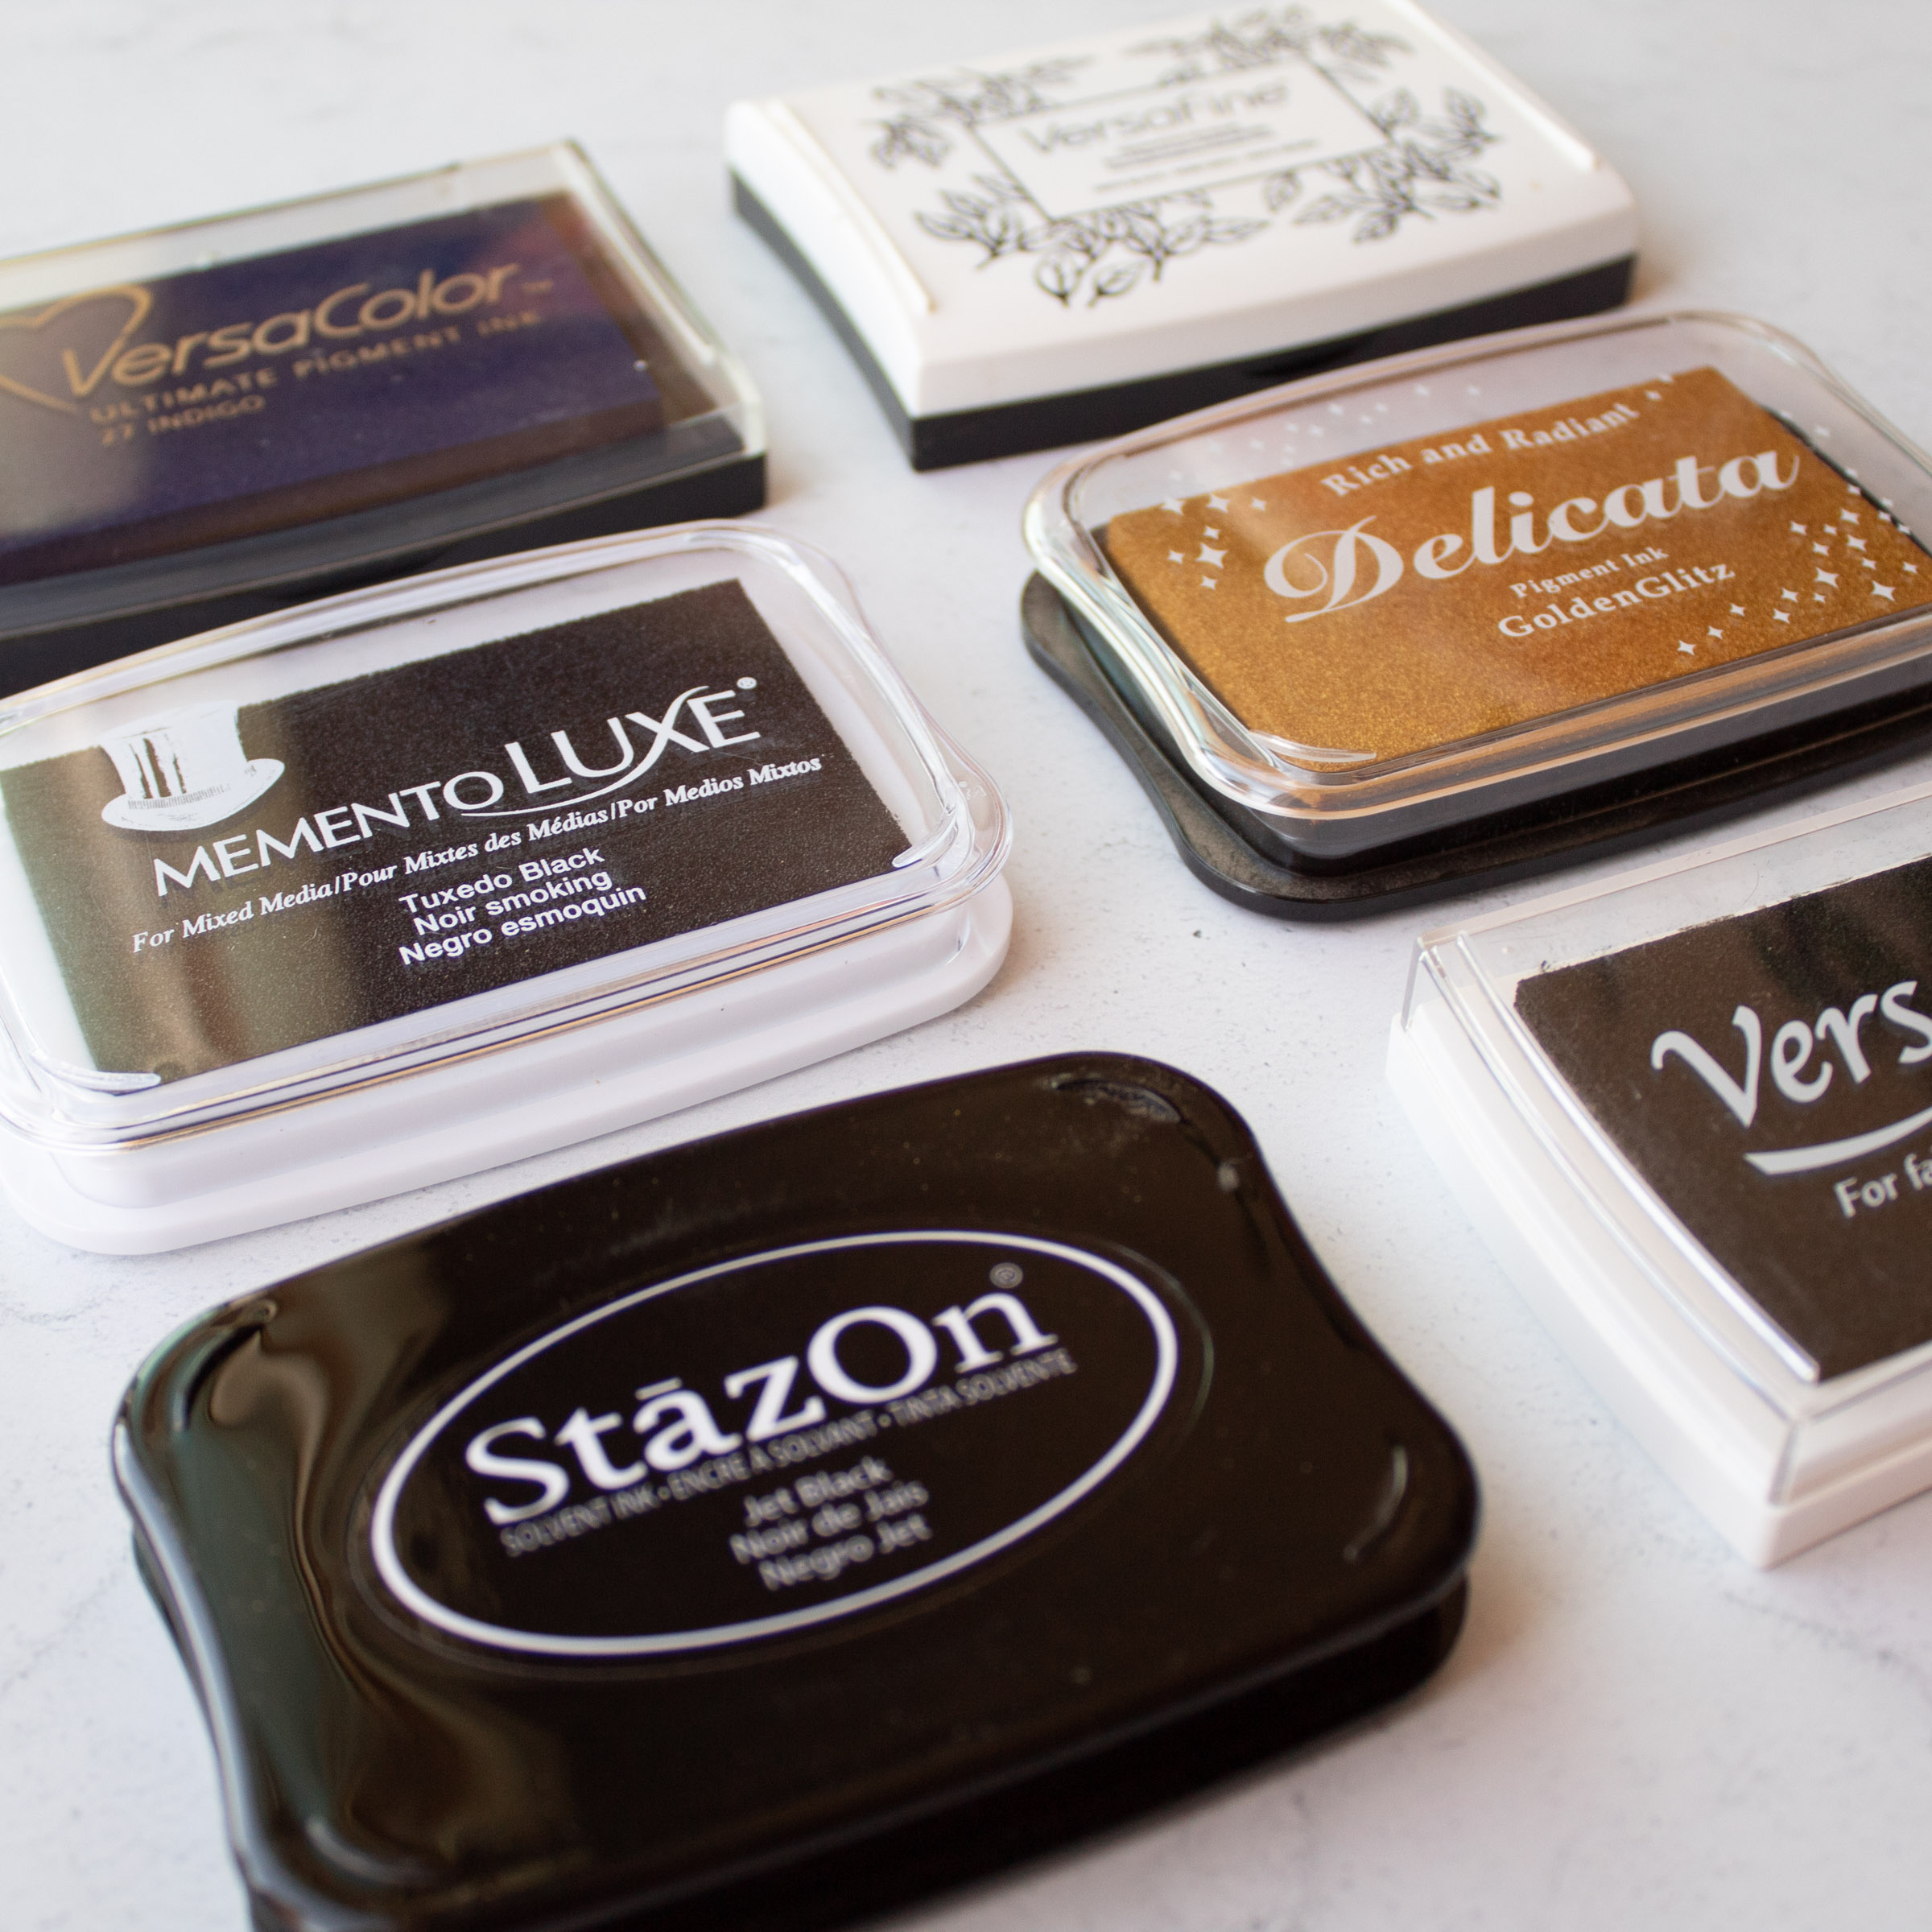 Inks for Stamping ~ Your Complete Guide